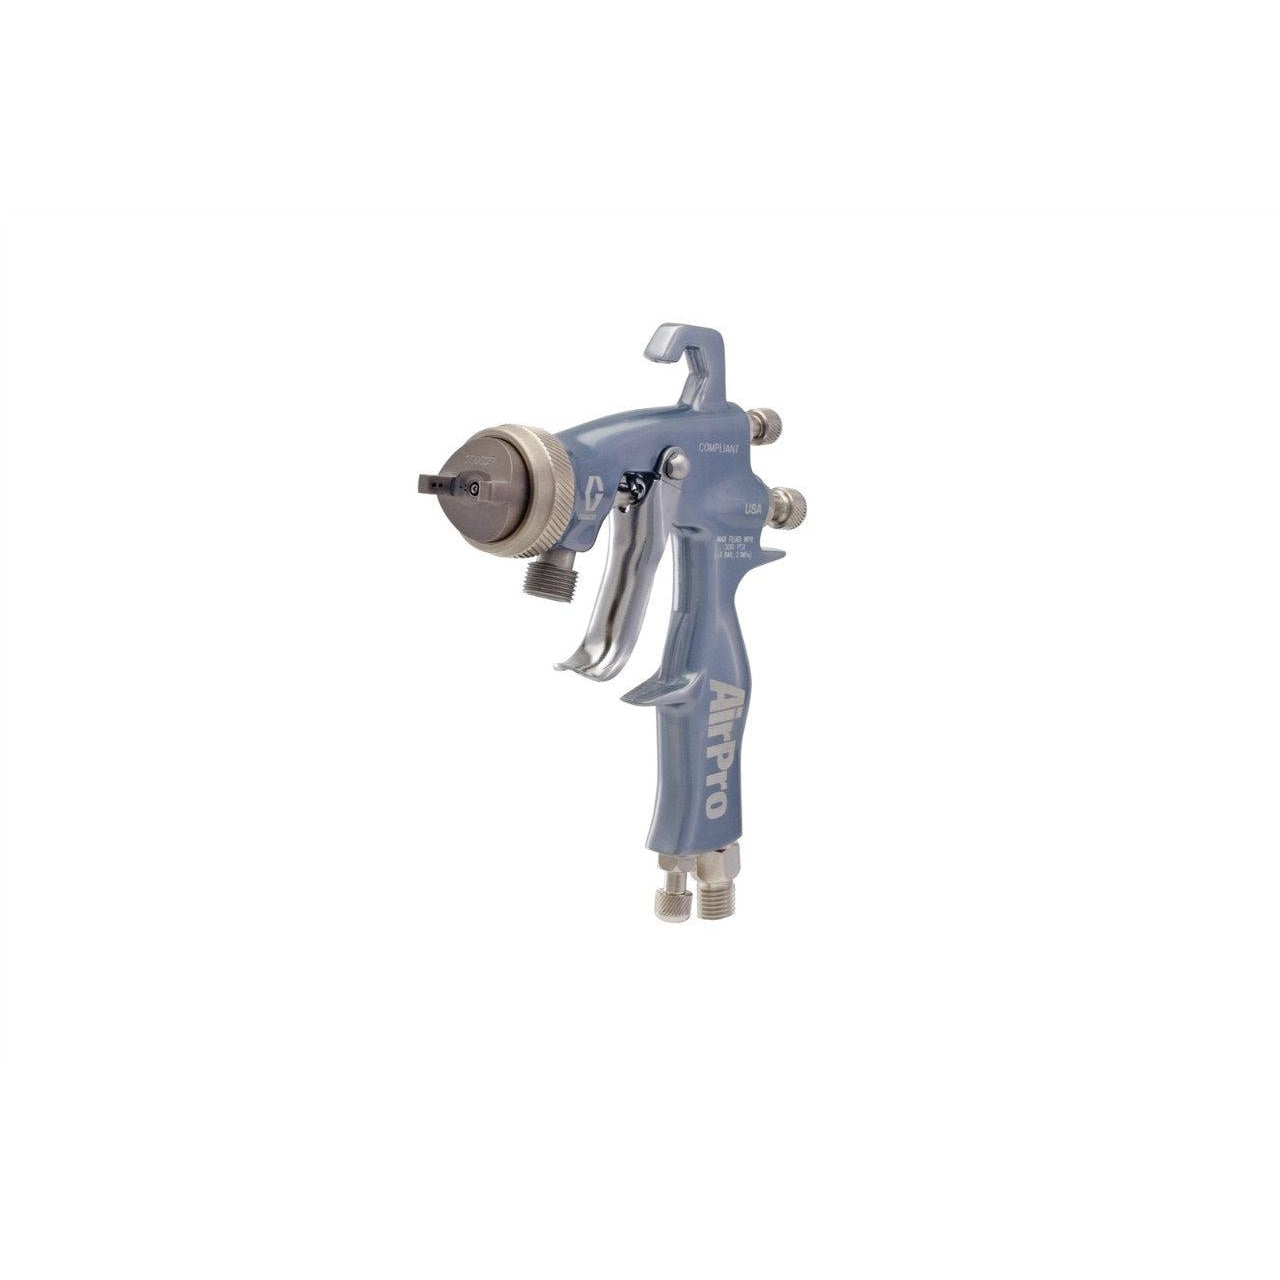 AirPro Air Spray Pressure Feed Gun, Compliant, 0.047 inch (1.2 mm) Nozzle, for Automotive Applications